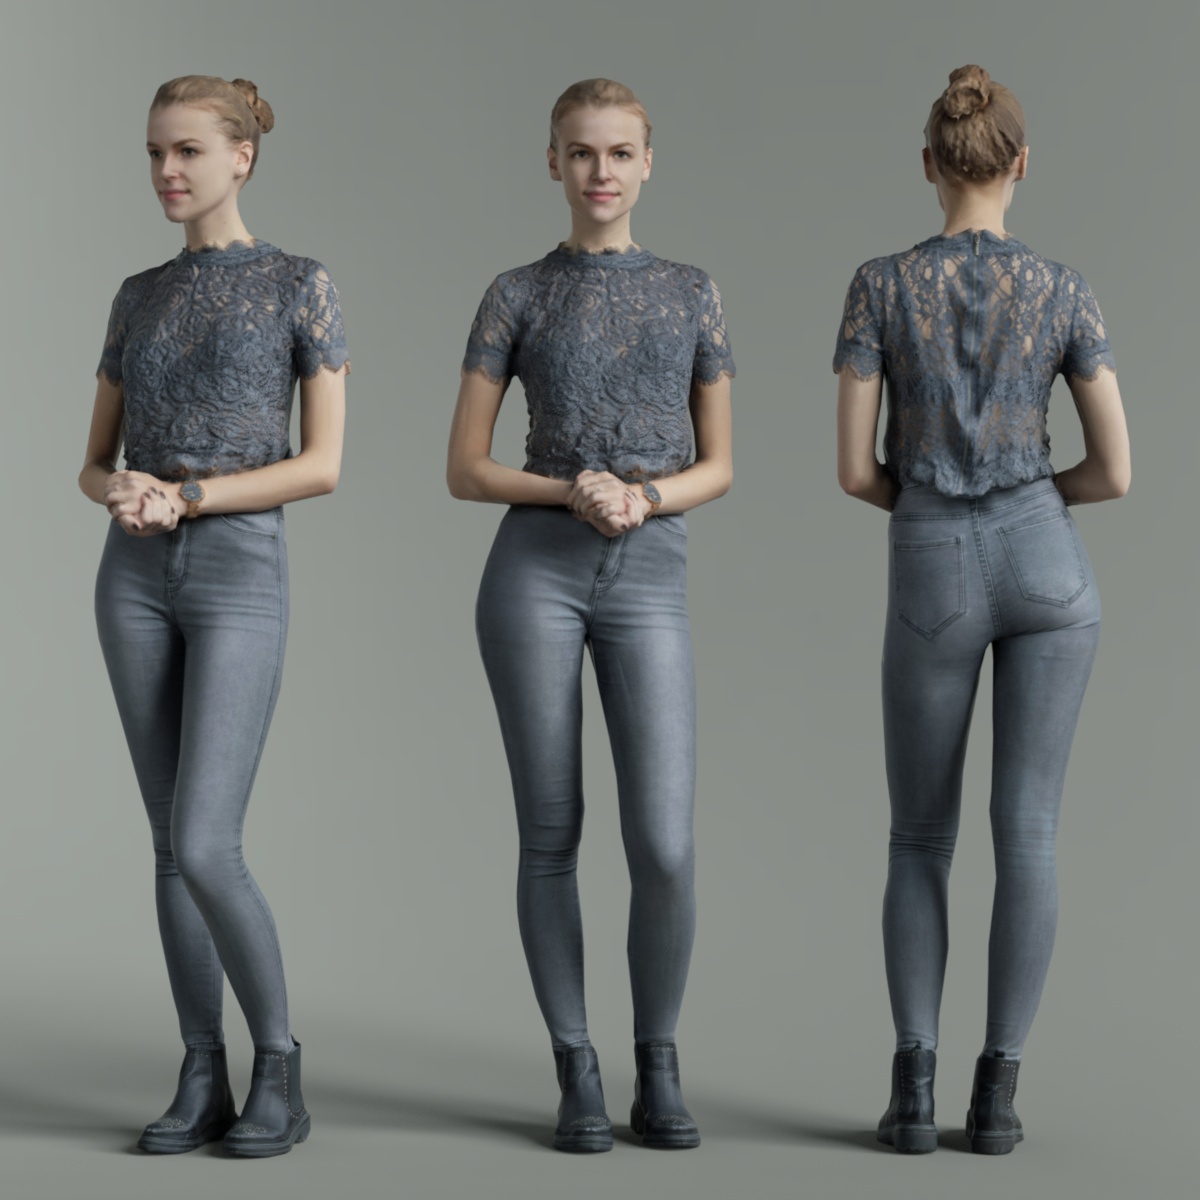 Casual Essential Poses for Genesis 9 | 3d Models for Daz Studio and Poser